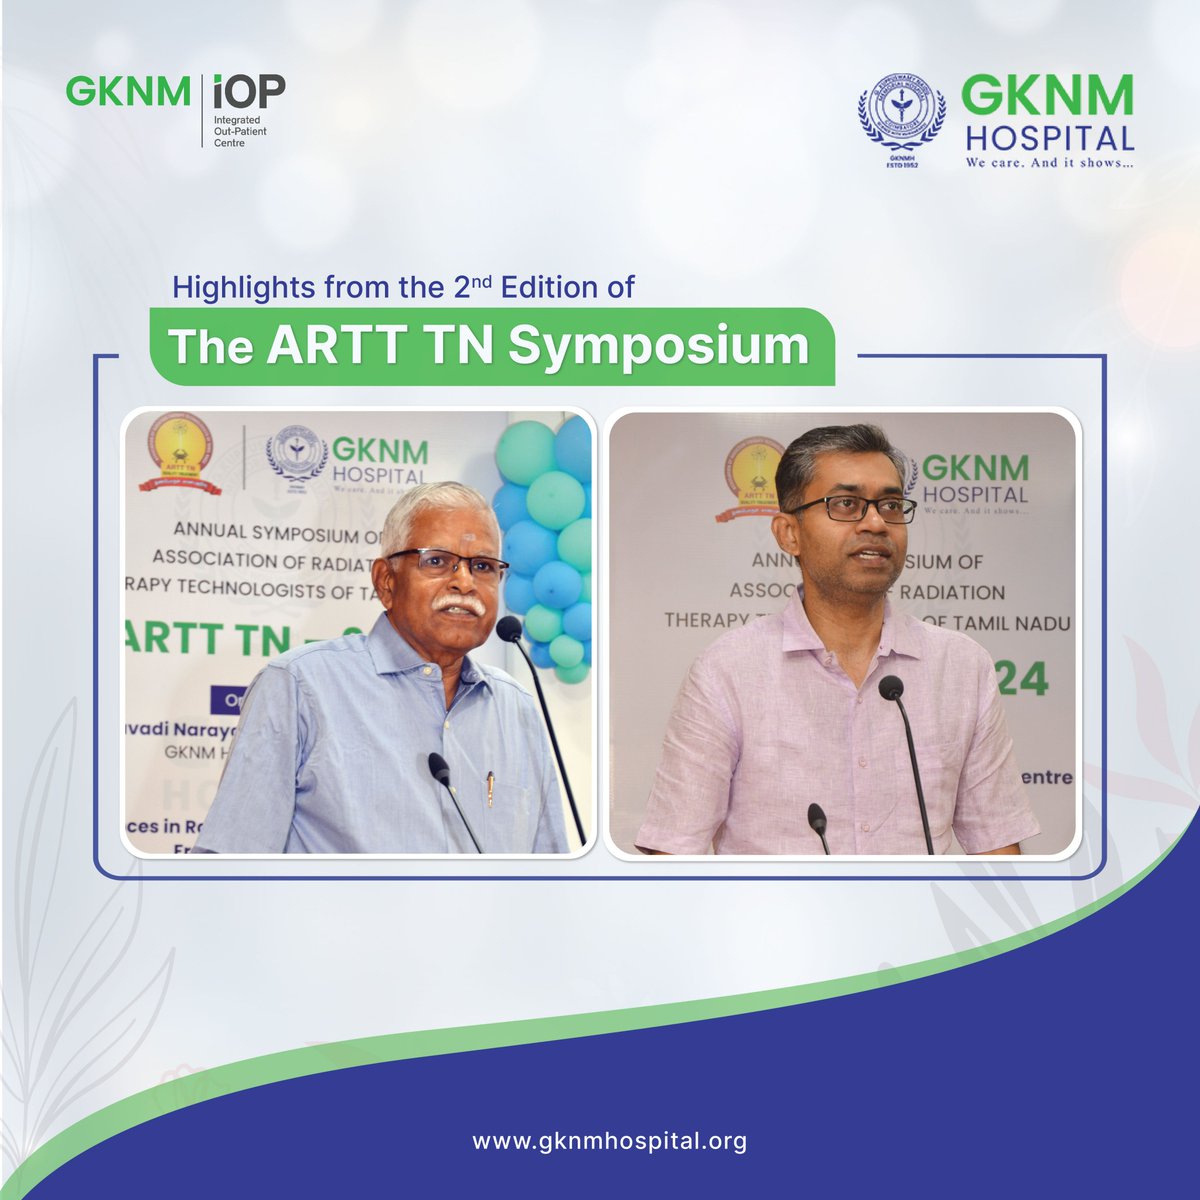 GKNM organized the 2nd Annual Symposium of the Association of Radiation Therapy Technologists of Tamil Nadu (ARTT TN - 2024) in May. The event witnessed delegates from various hospitals and teaching institutes across Tamil Nadu.

#Radiationtherapy #GKNMH #GKNMiOP #GKNMHospital